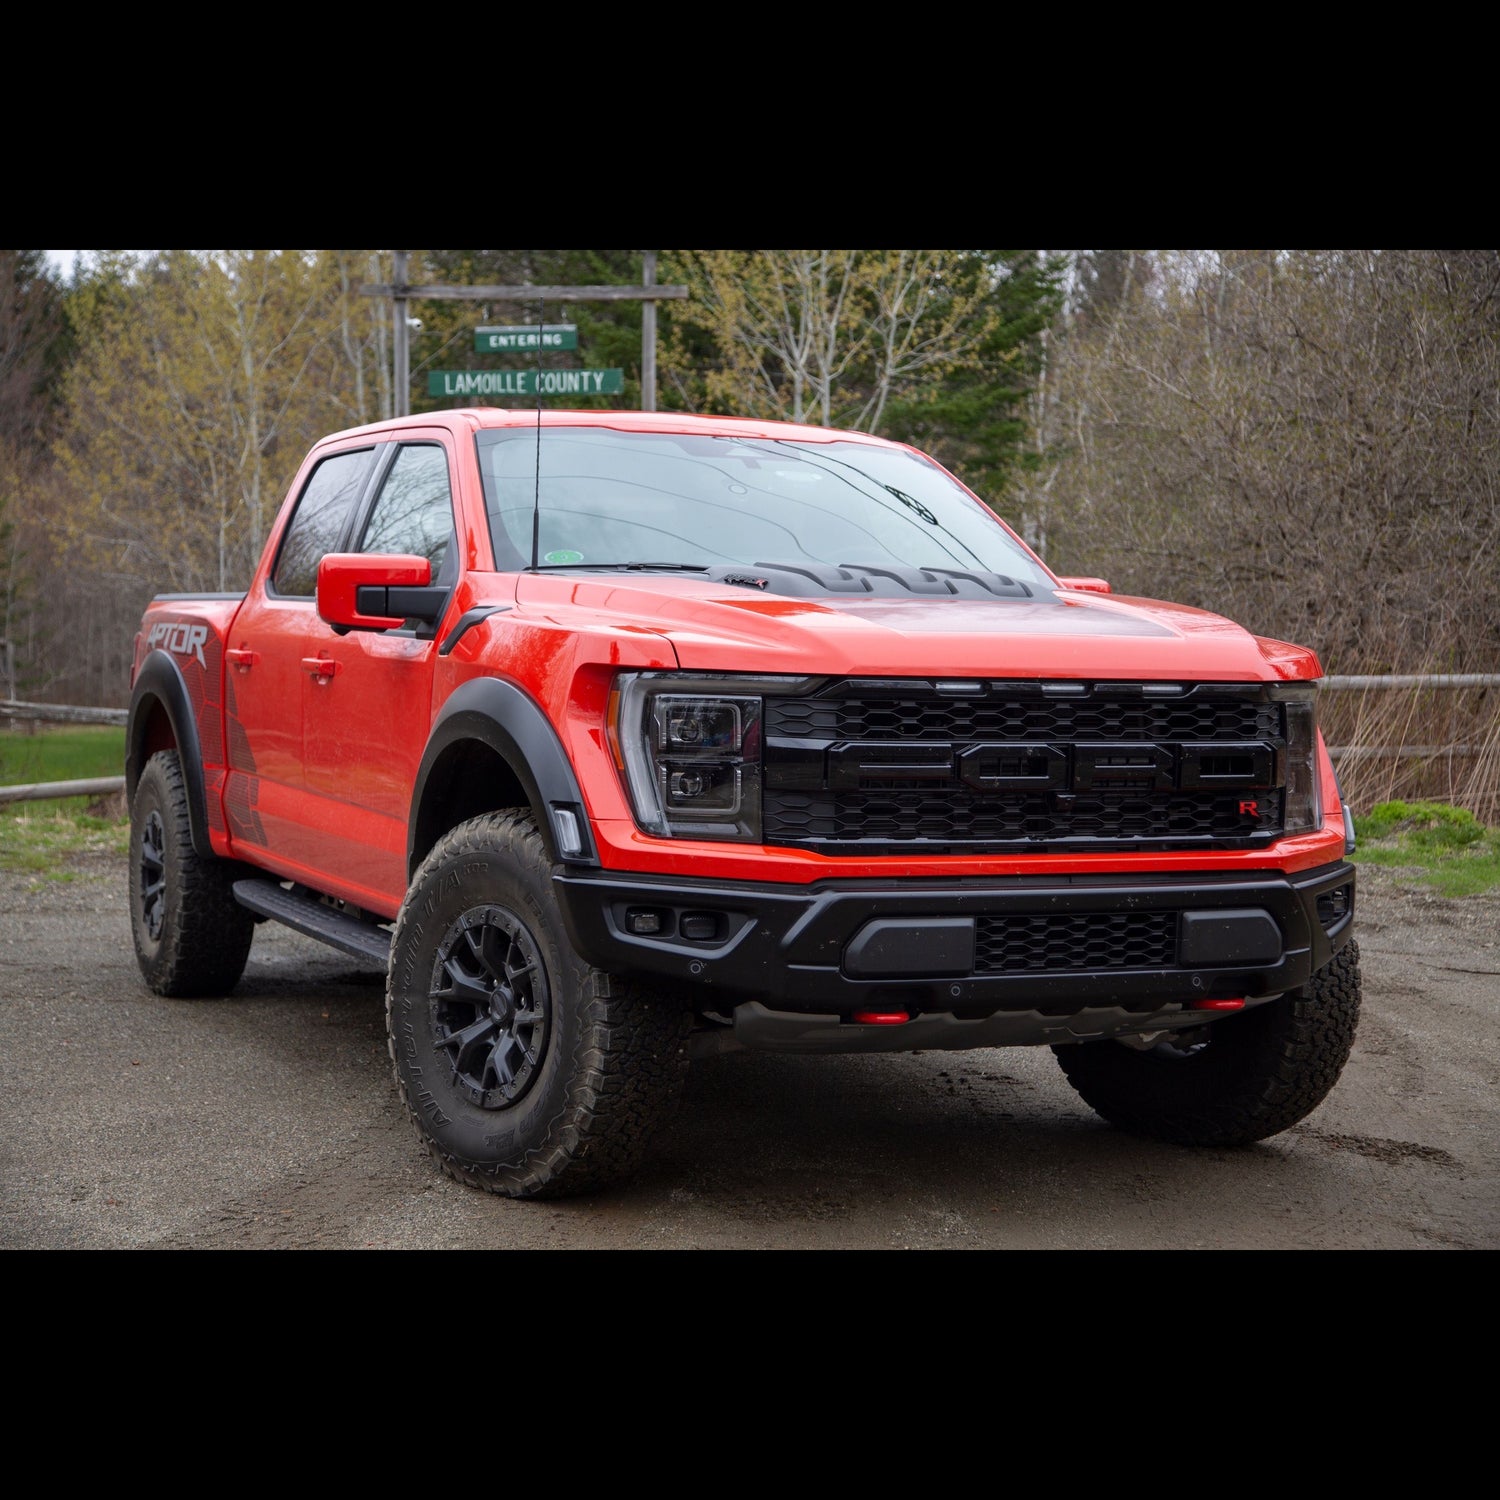 Red Ford F150 Raptor R on a dirt road